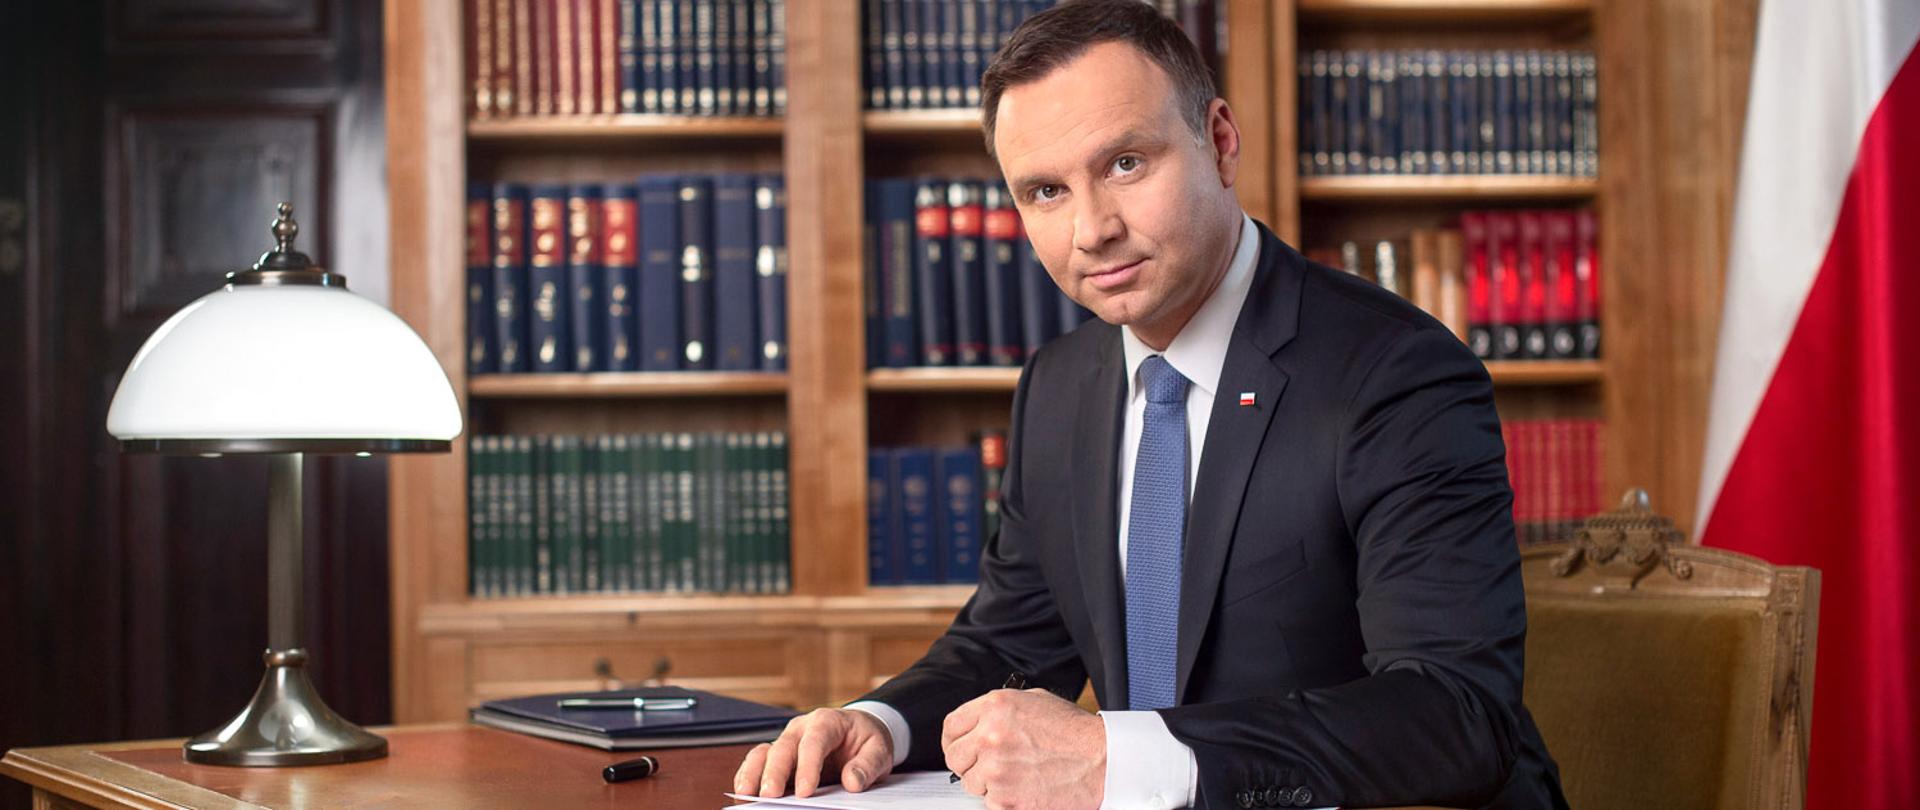 President of the Republic of Poland